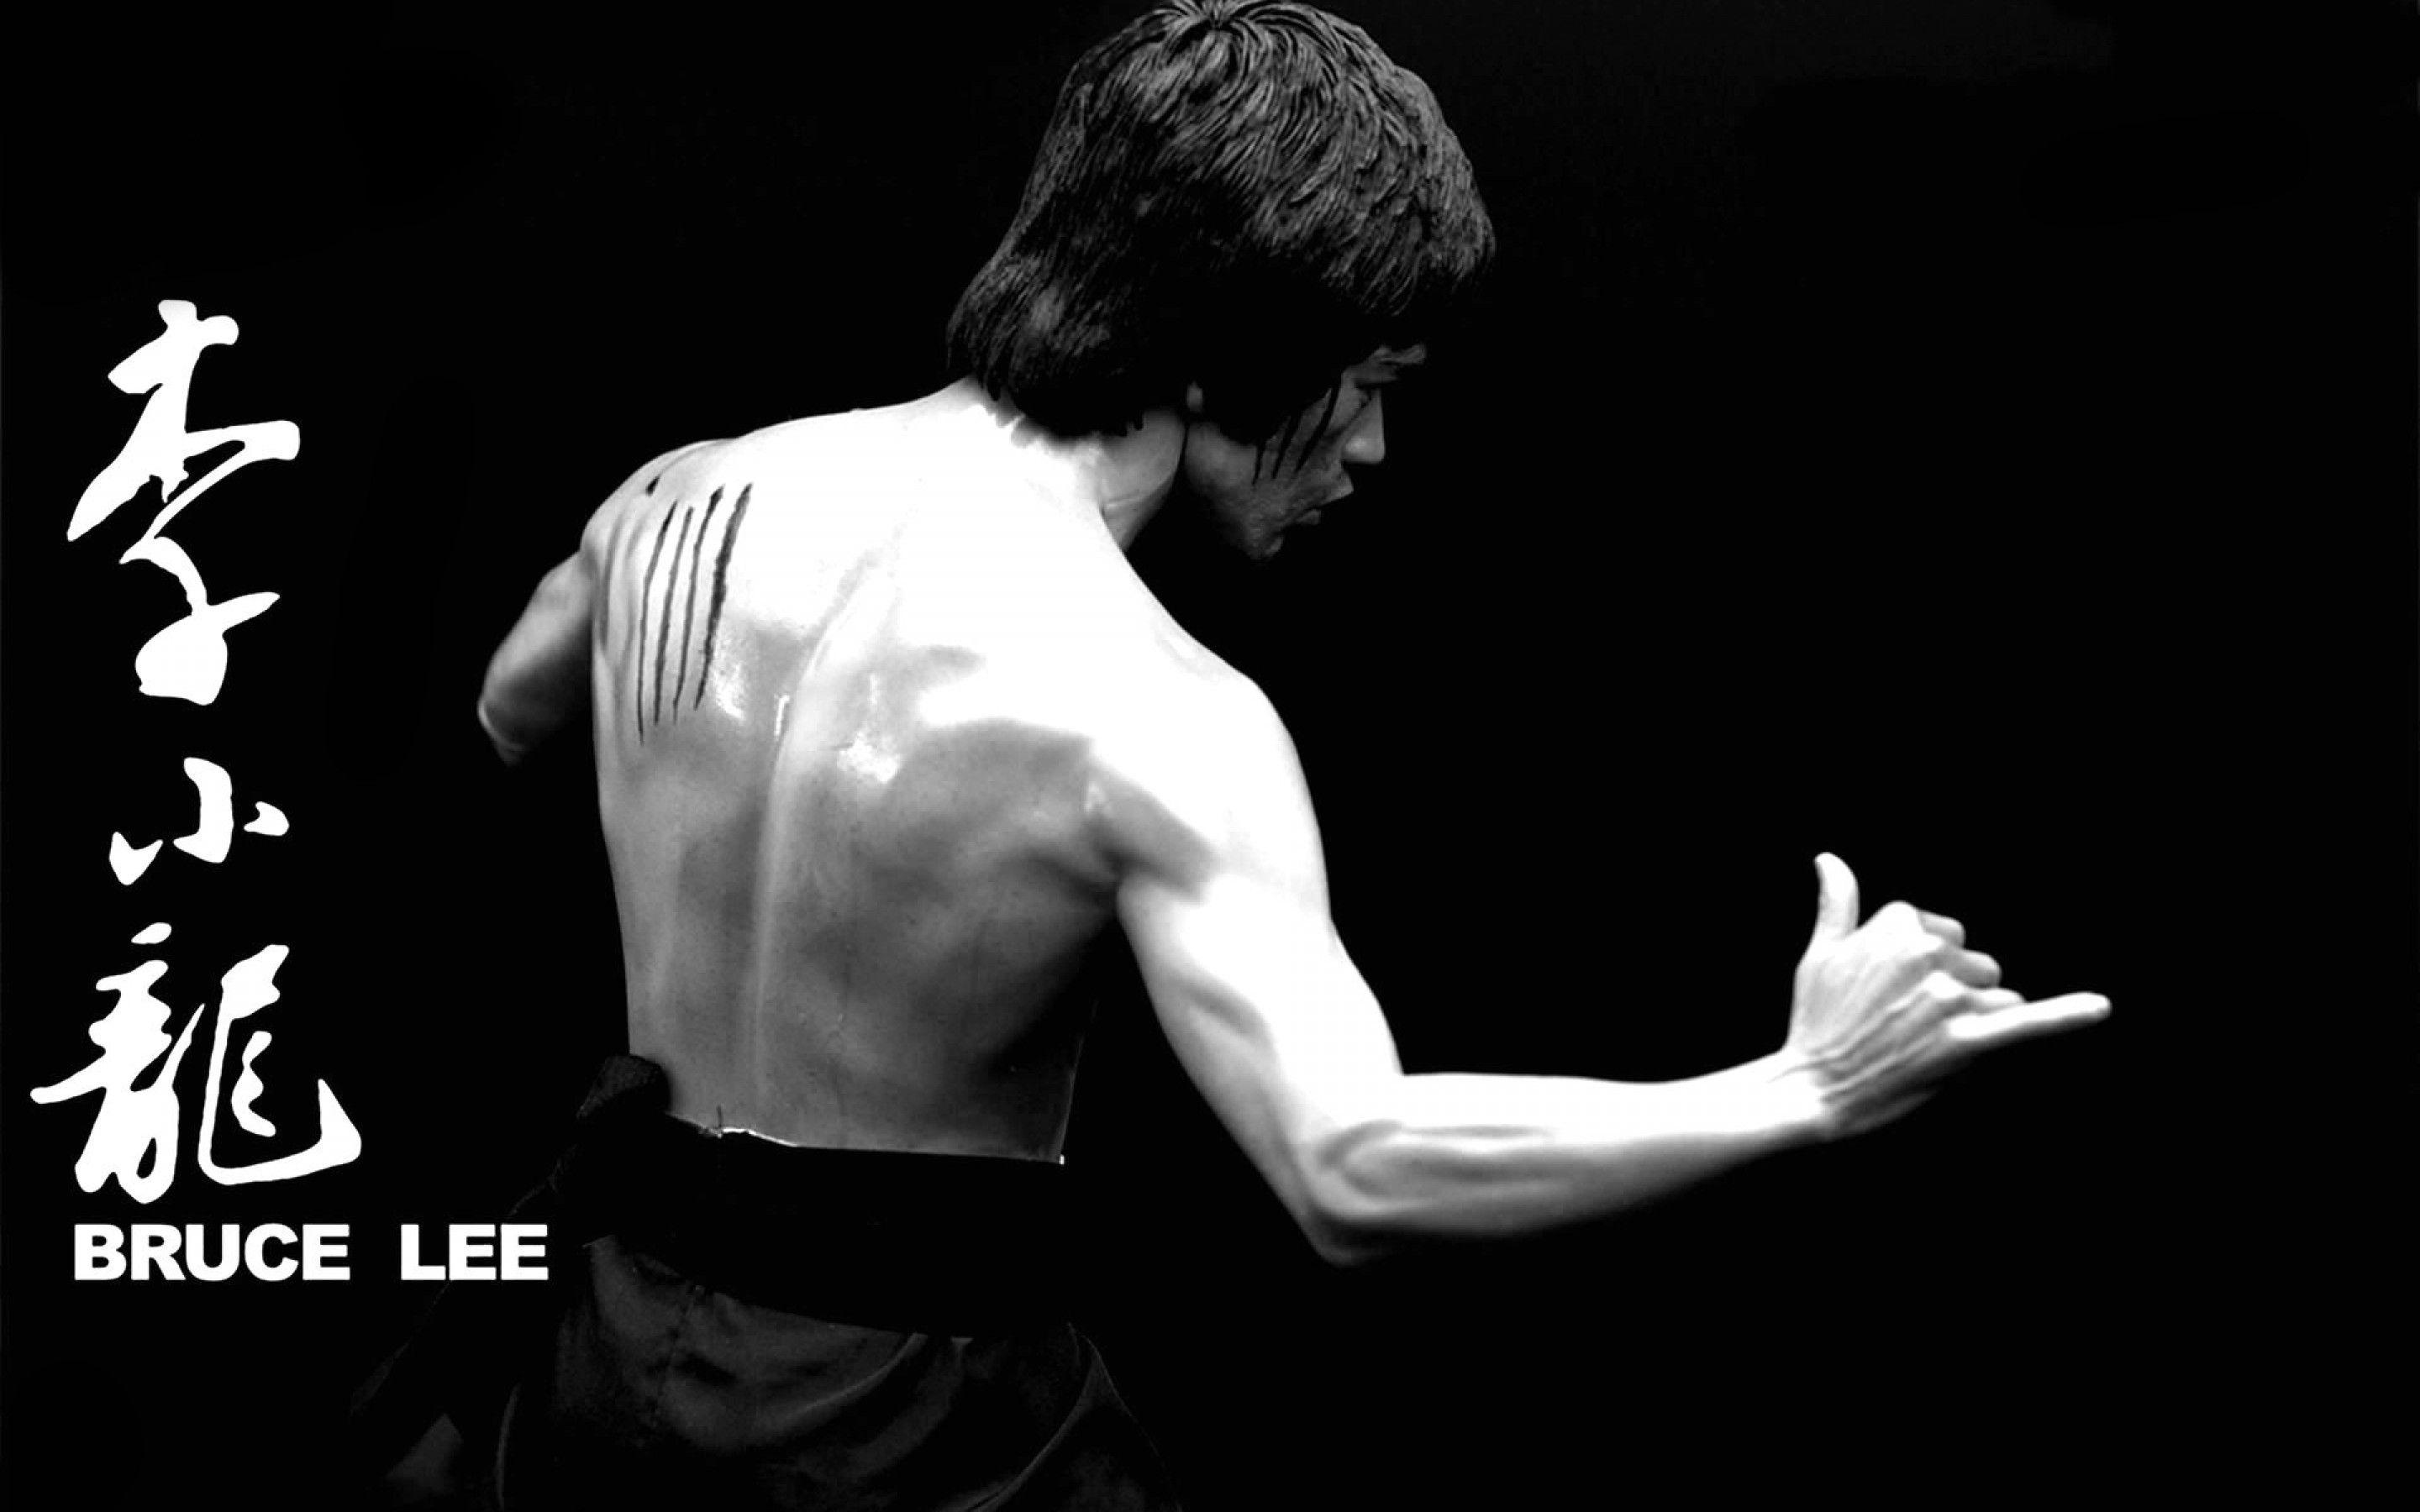 Bruce Lee HD Wallpaper for Android Free Download on MoboMarket